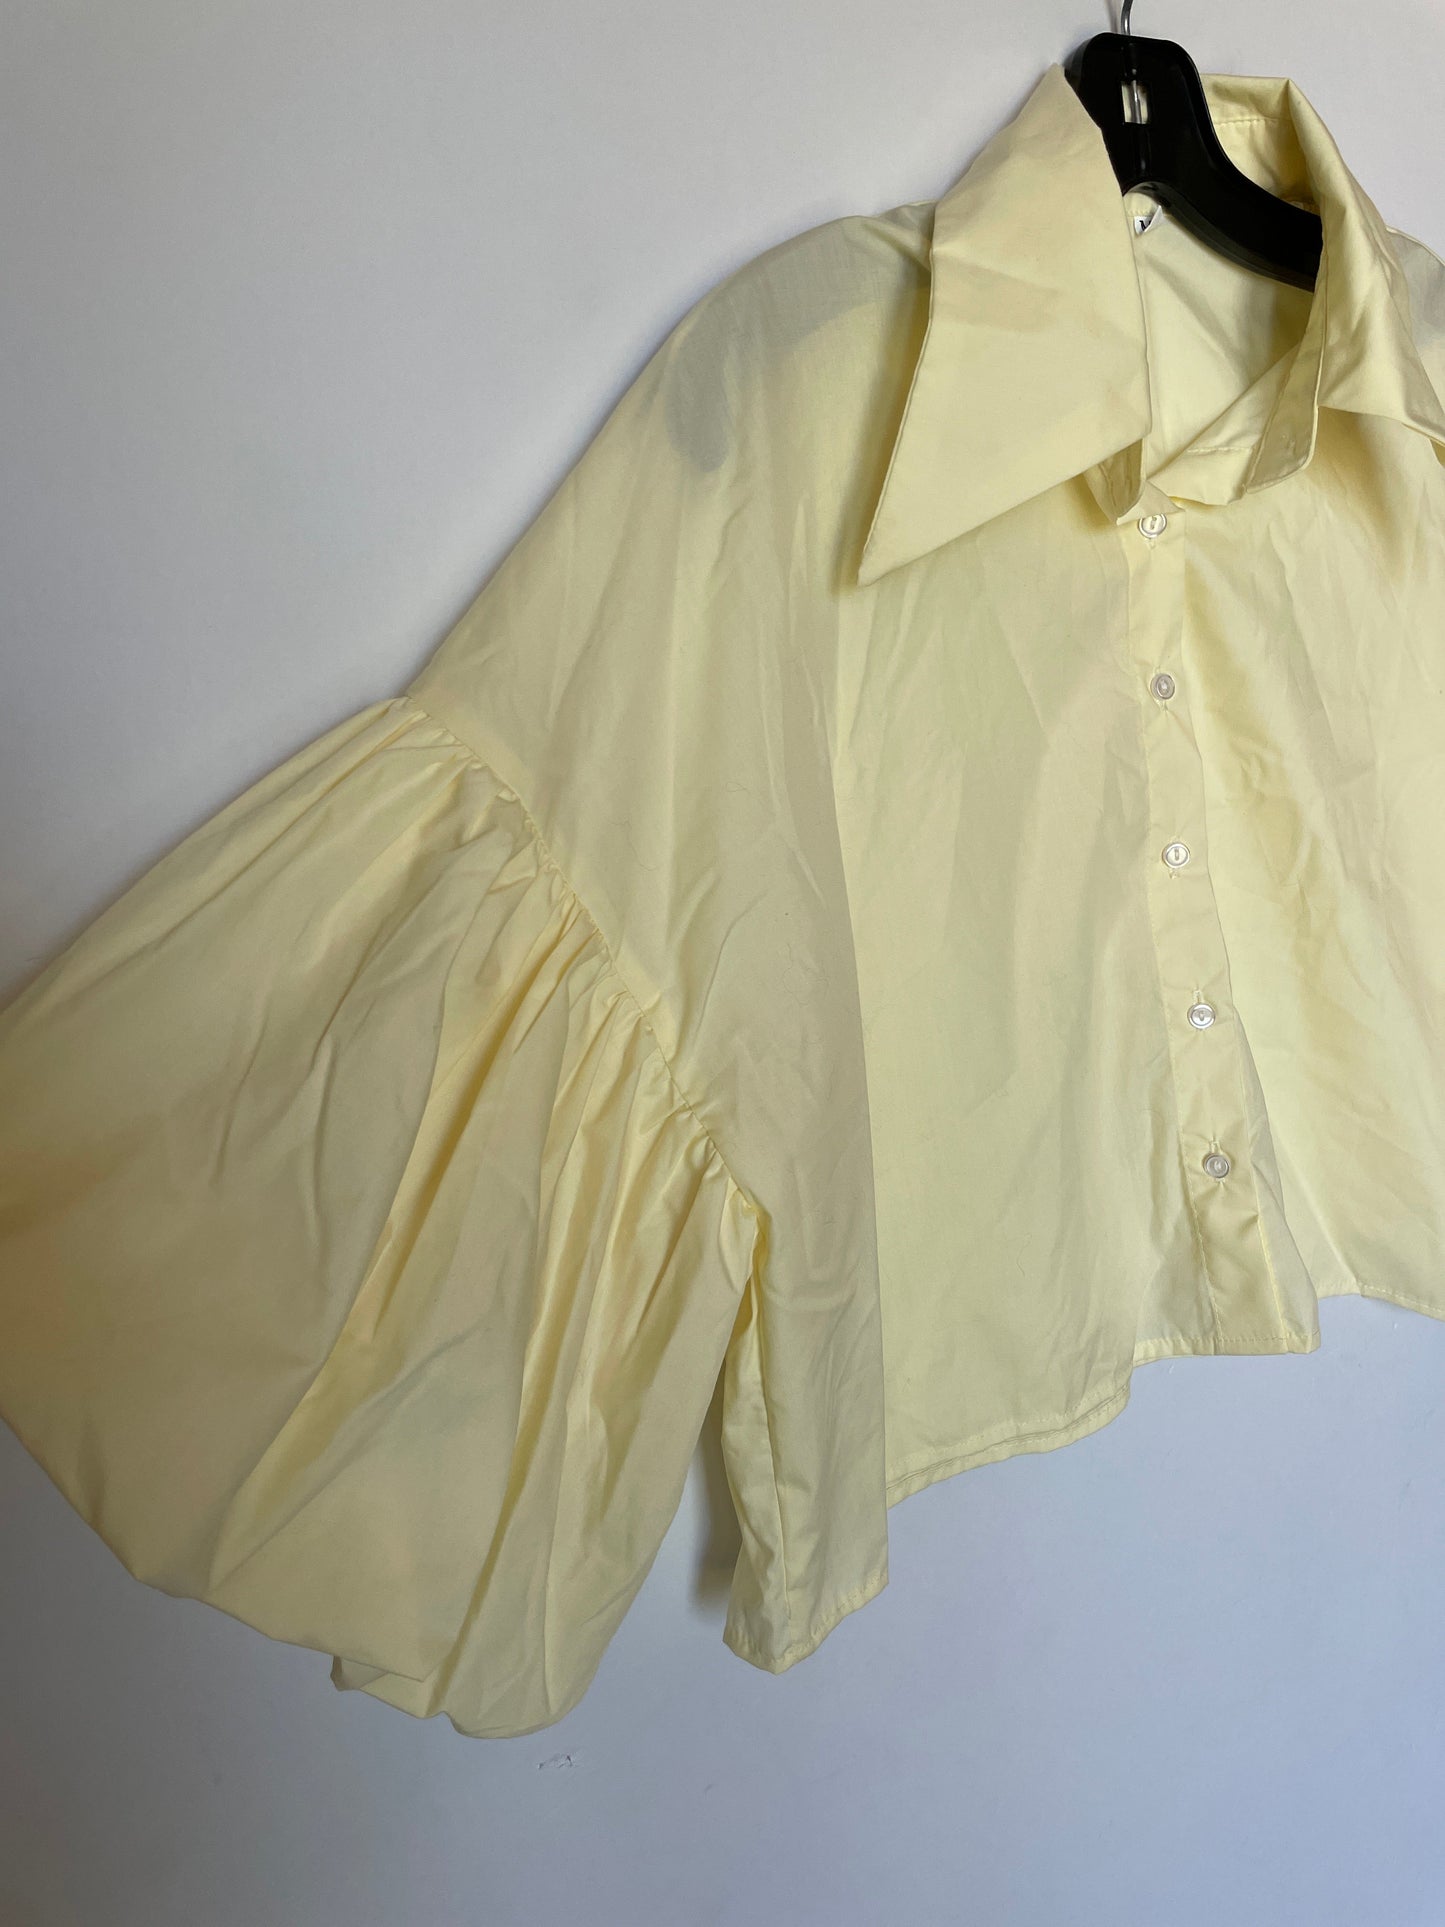 Yellow Top Short Sleeve Clothes Mentor, Size M